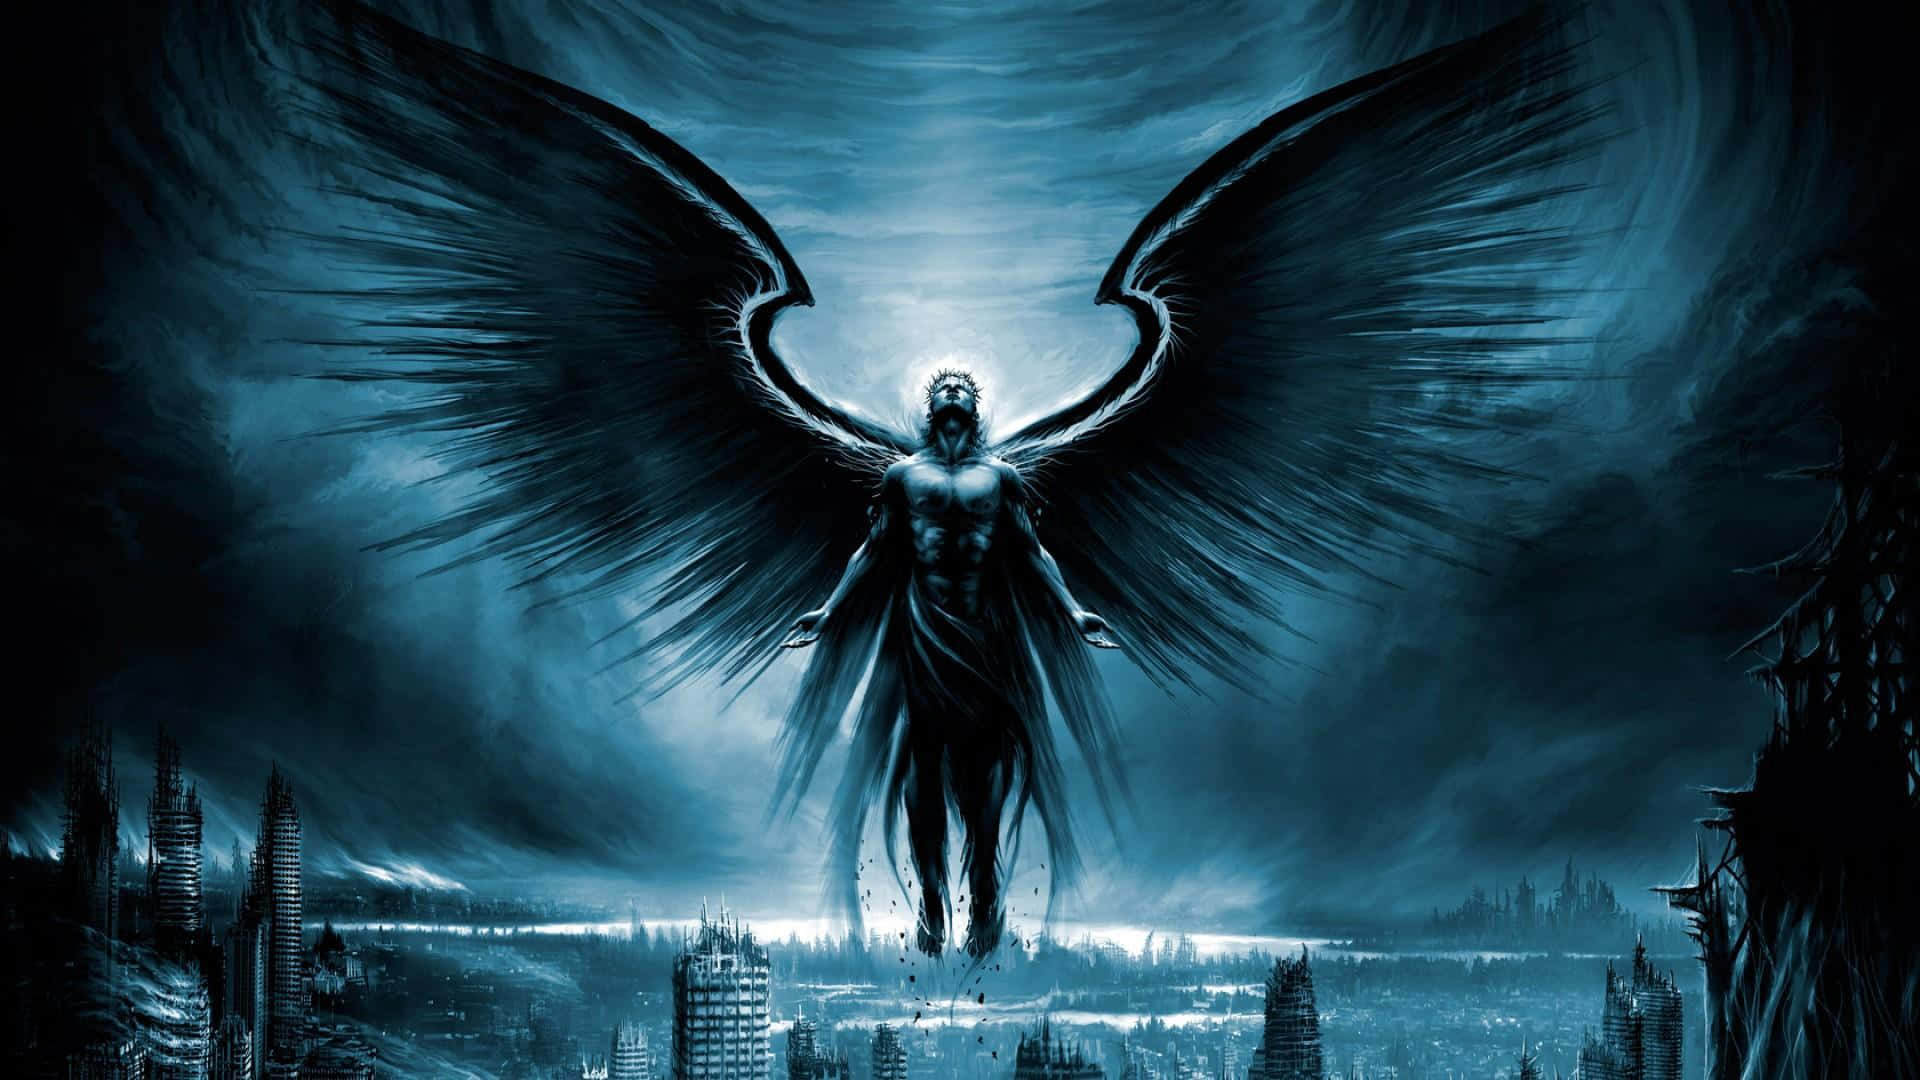 A Dark Angel With Wings Flying Over A City